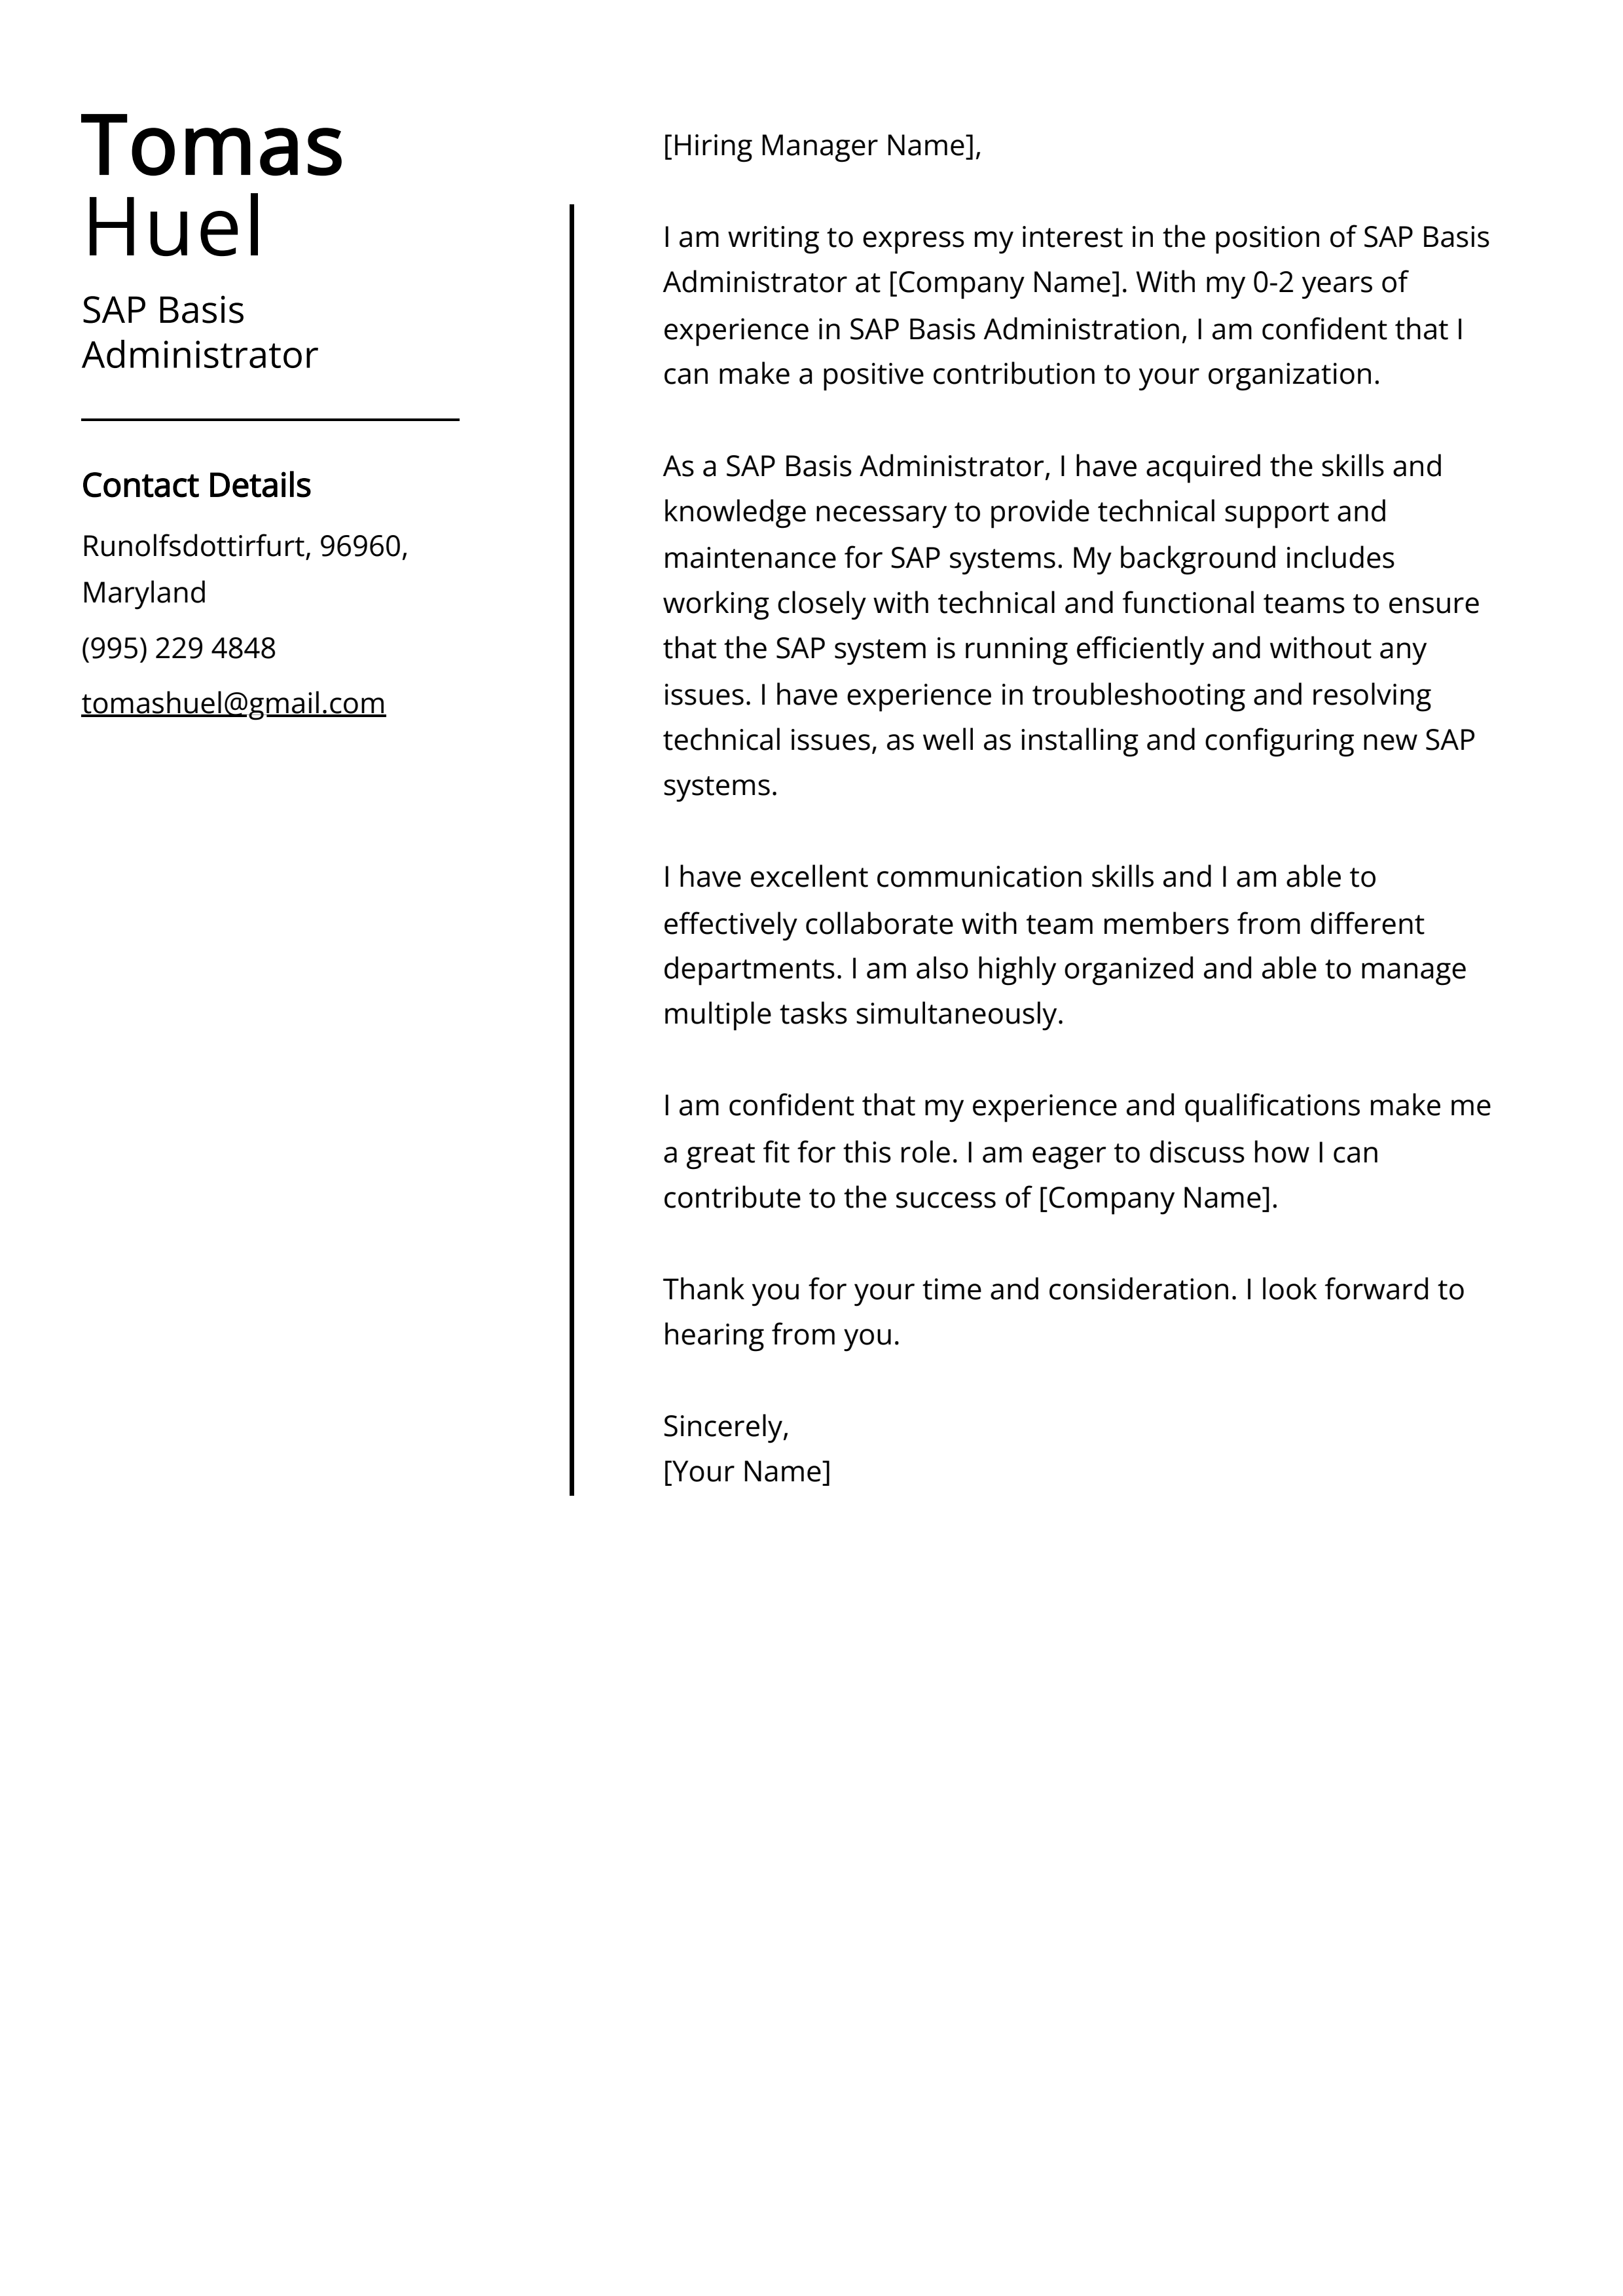 SAP Basis Administrator Cover Letter Example